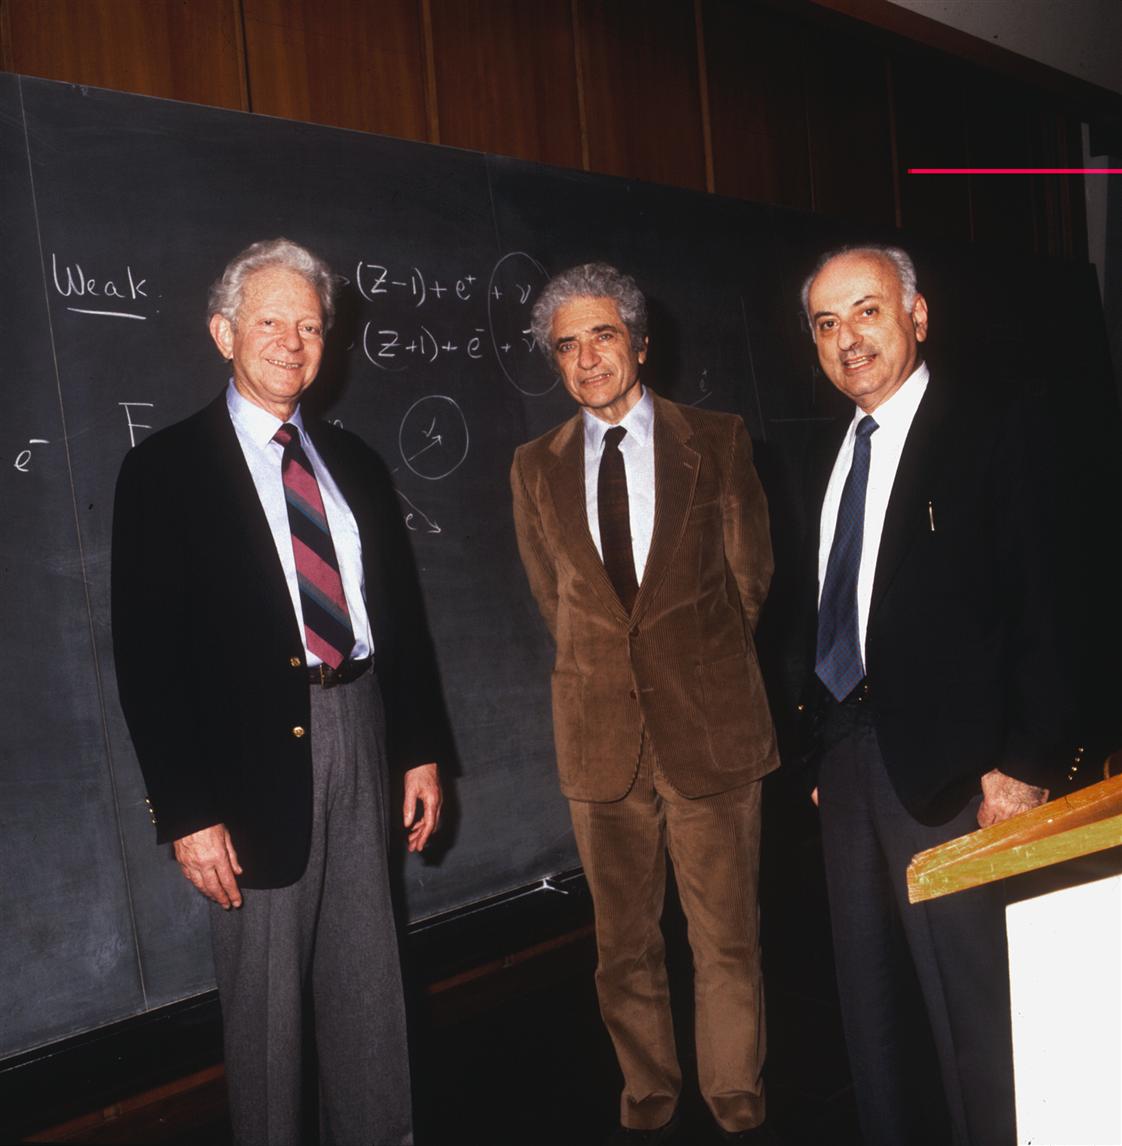 Three scientists posing in front of a blackboard